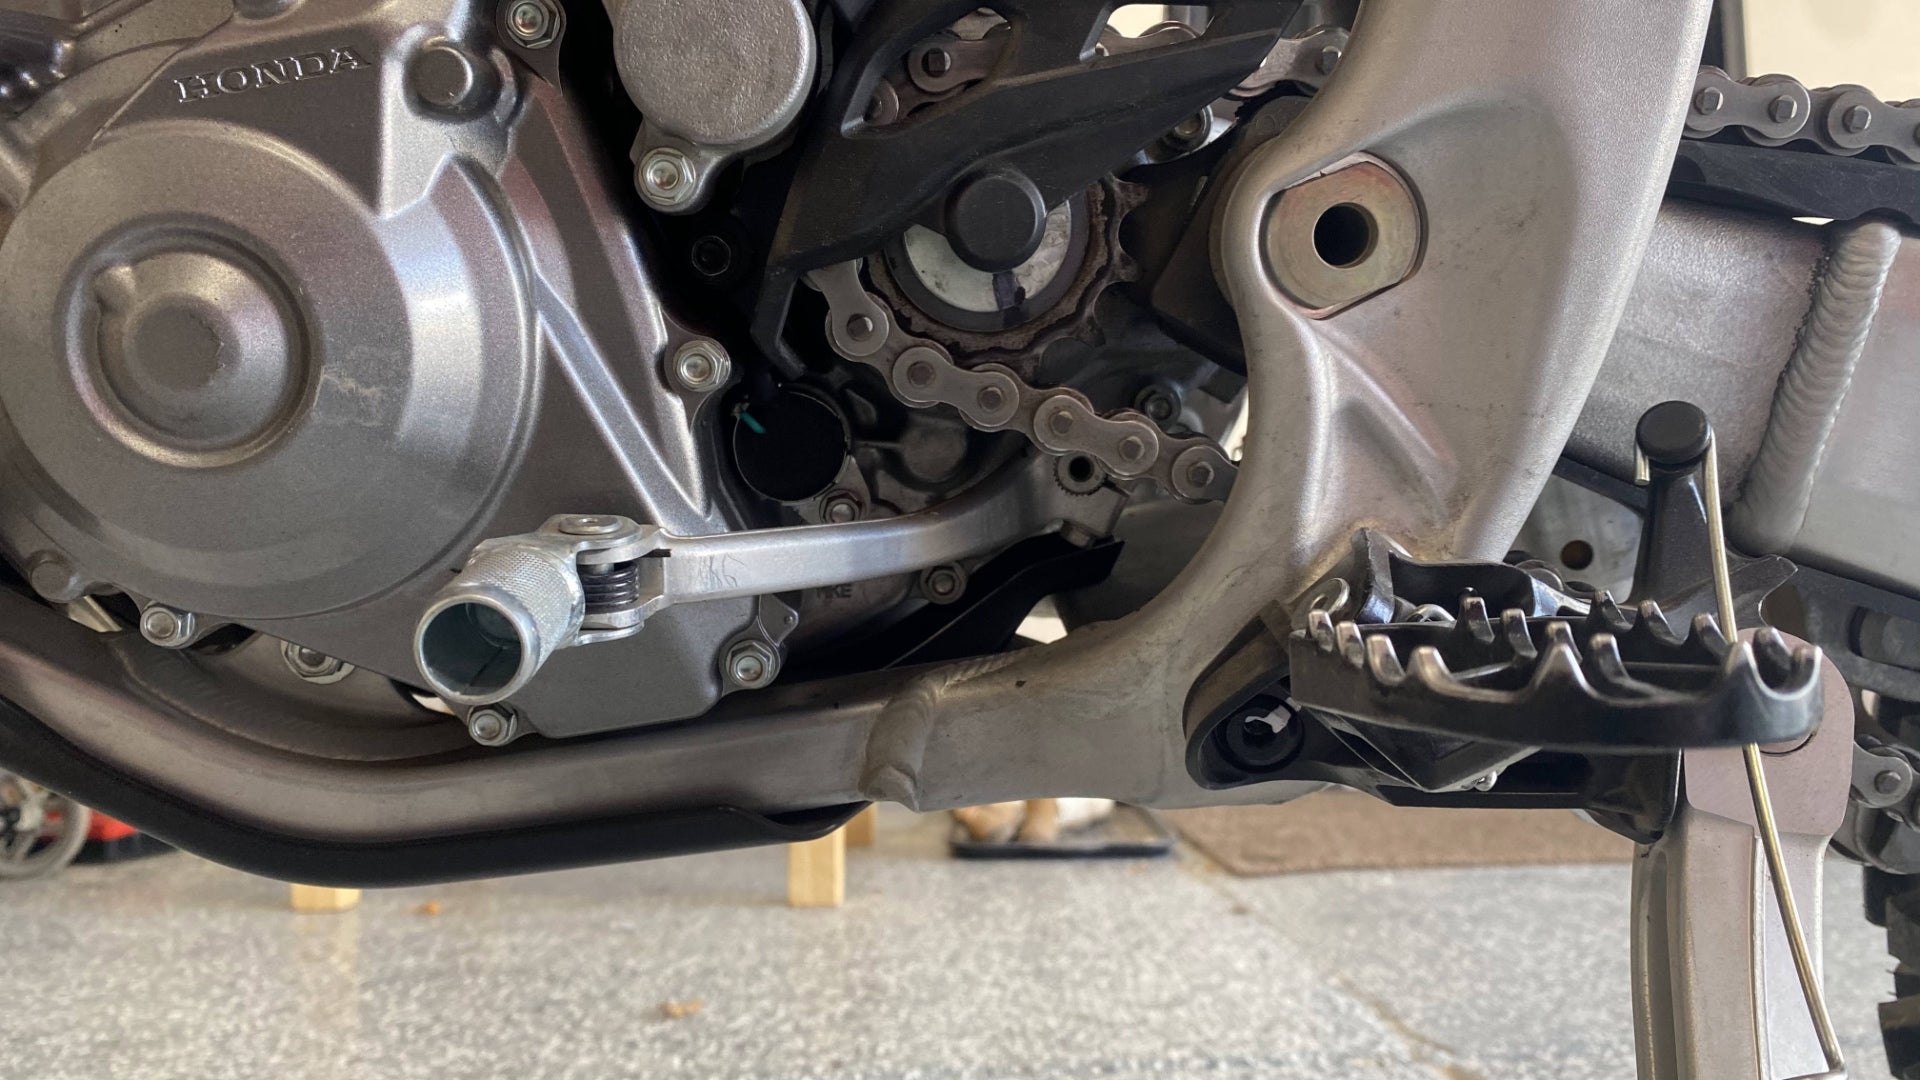 The countershaft sprocket behind the shifter and foot peg., <i>Jonathon Klein</i>